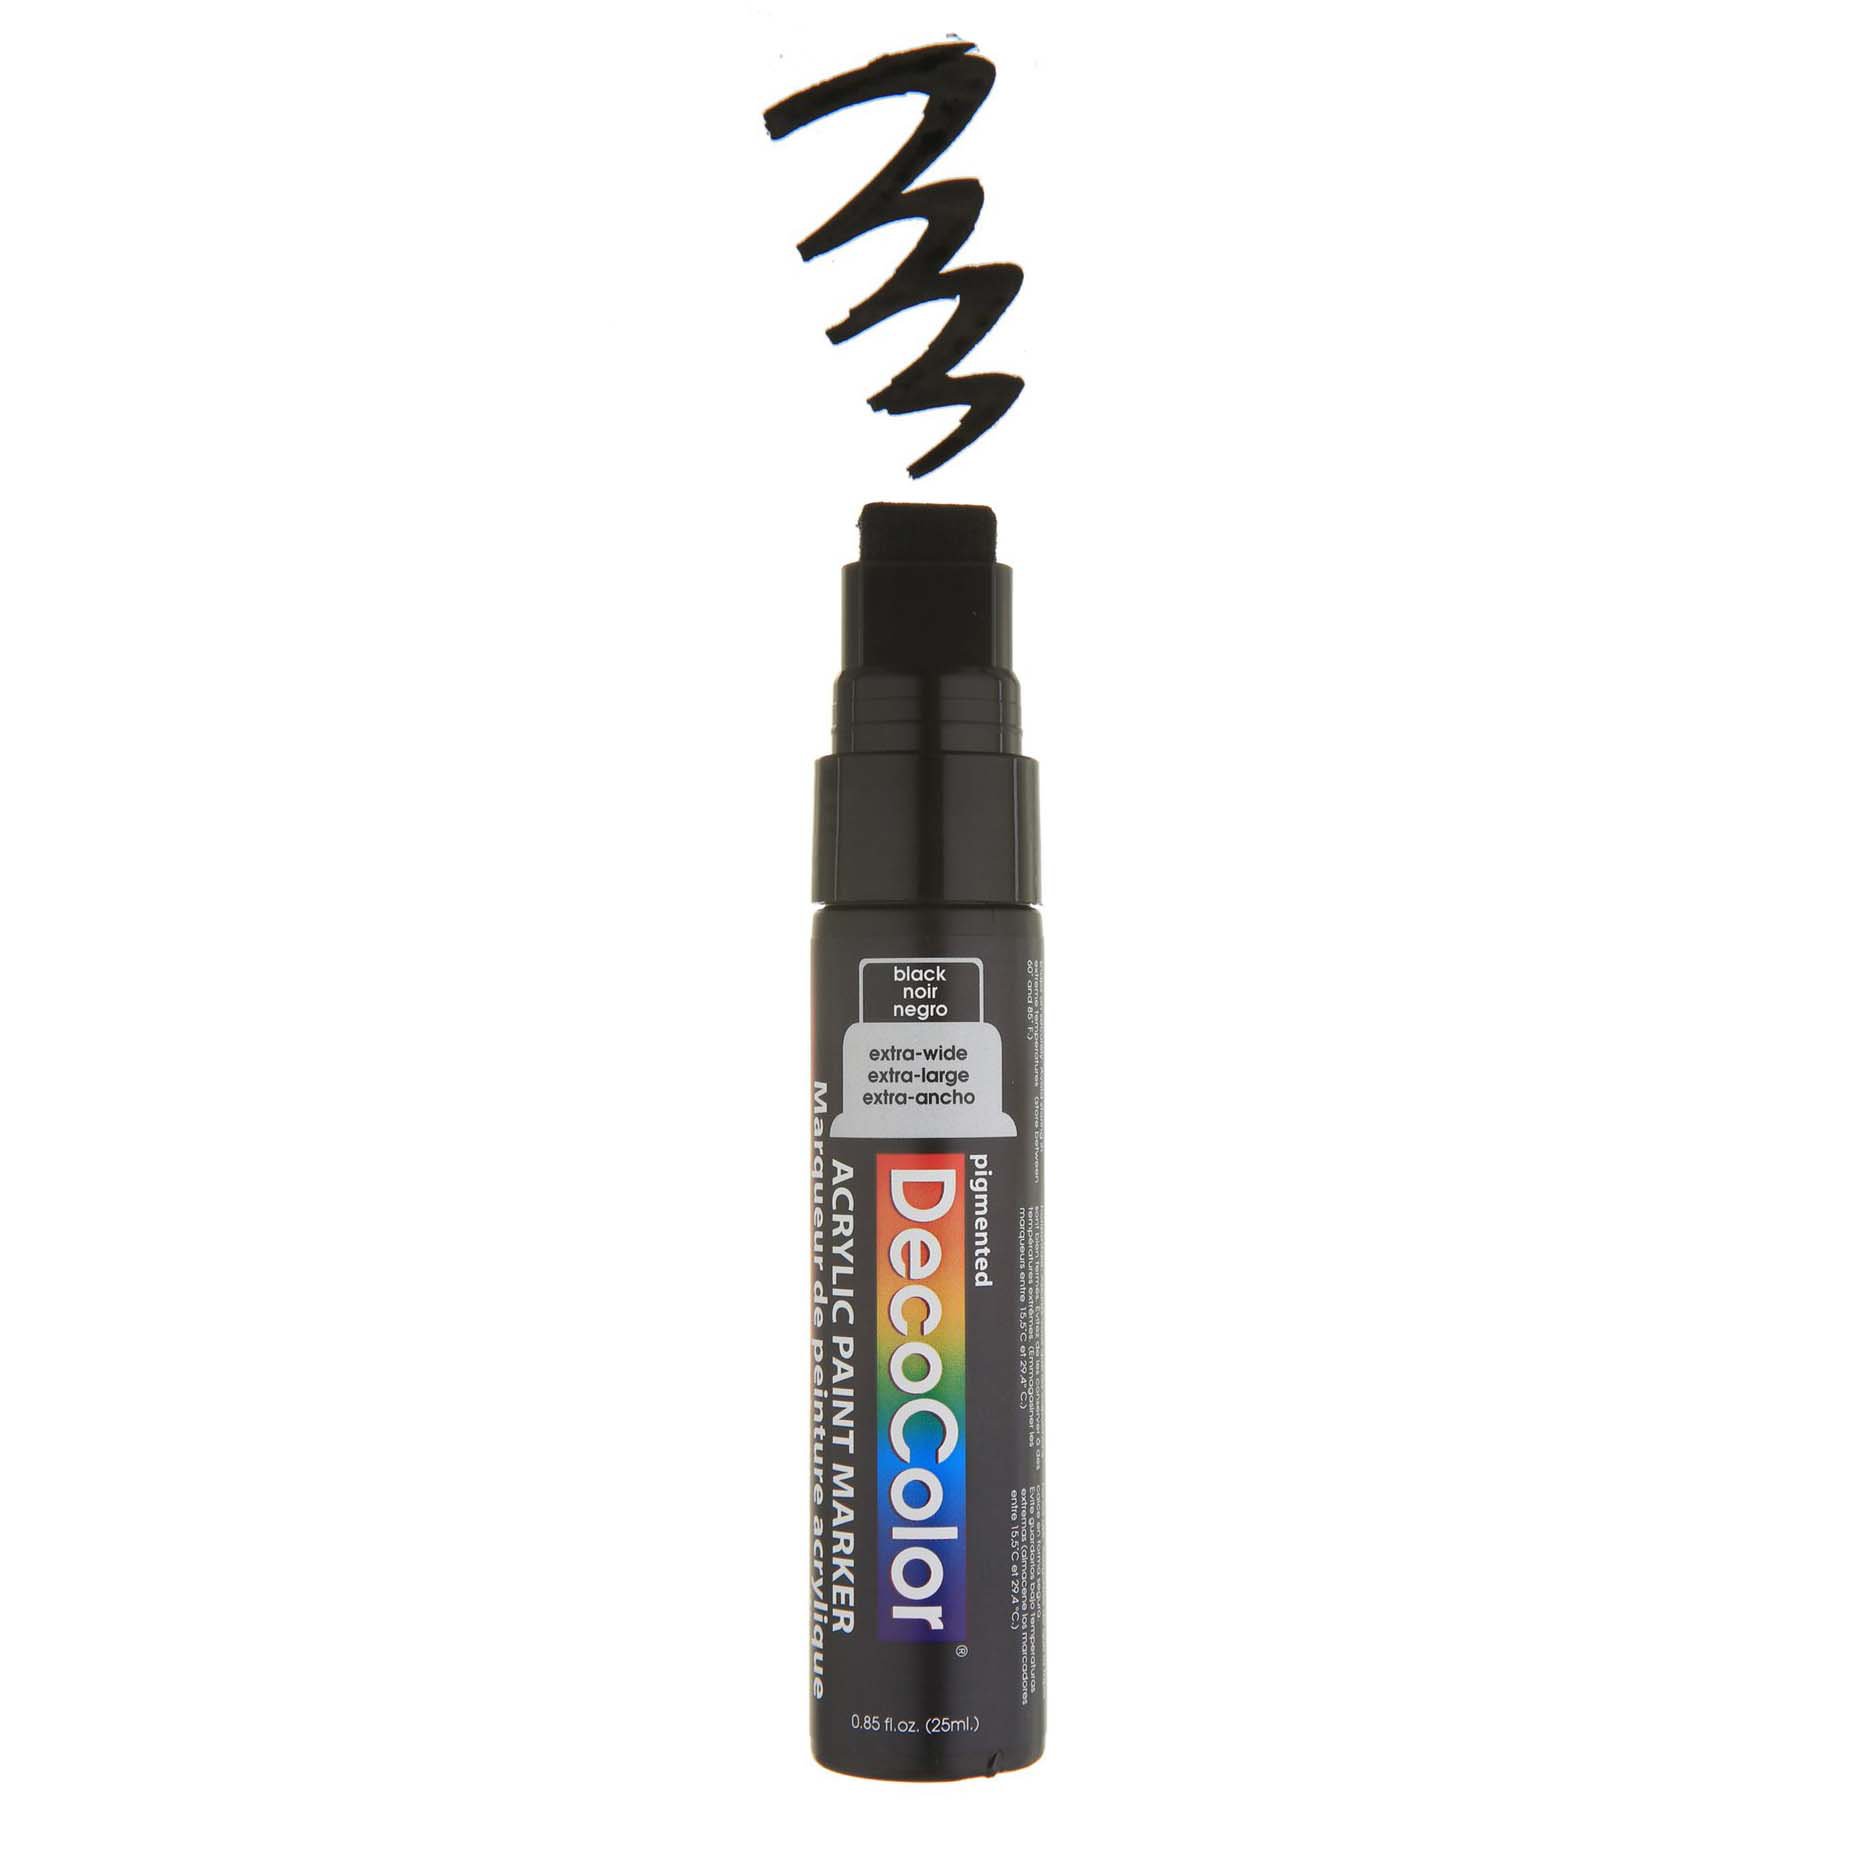 DecoColor And Craft Smart Paint Marker Review, DecoColor And Craft Smart  Paint Pen Review